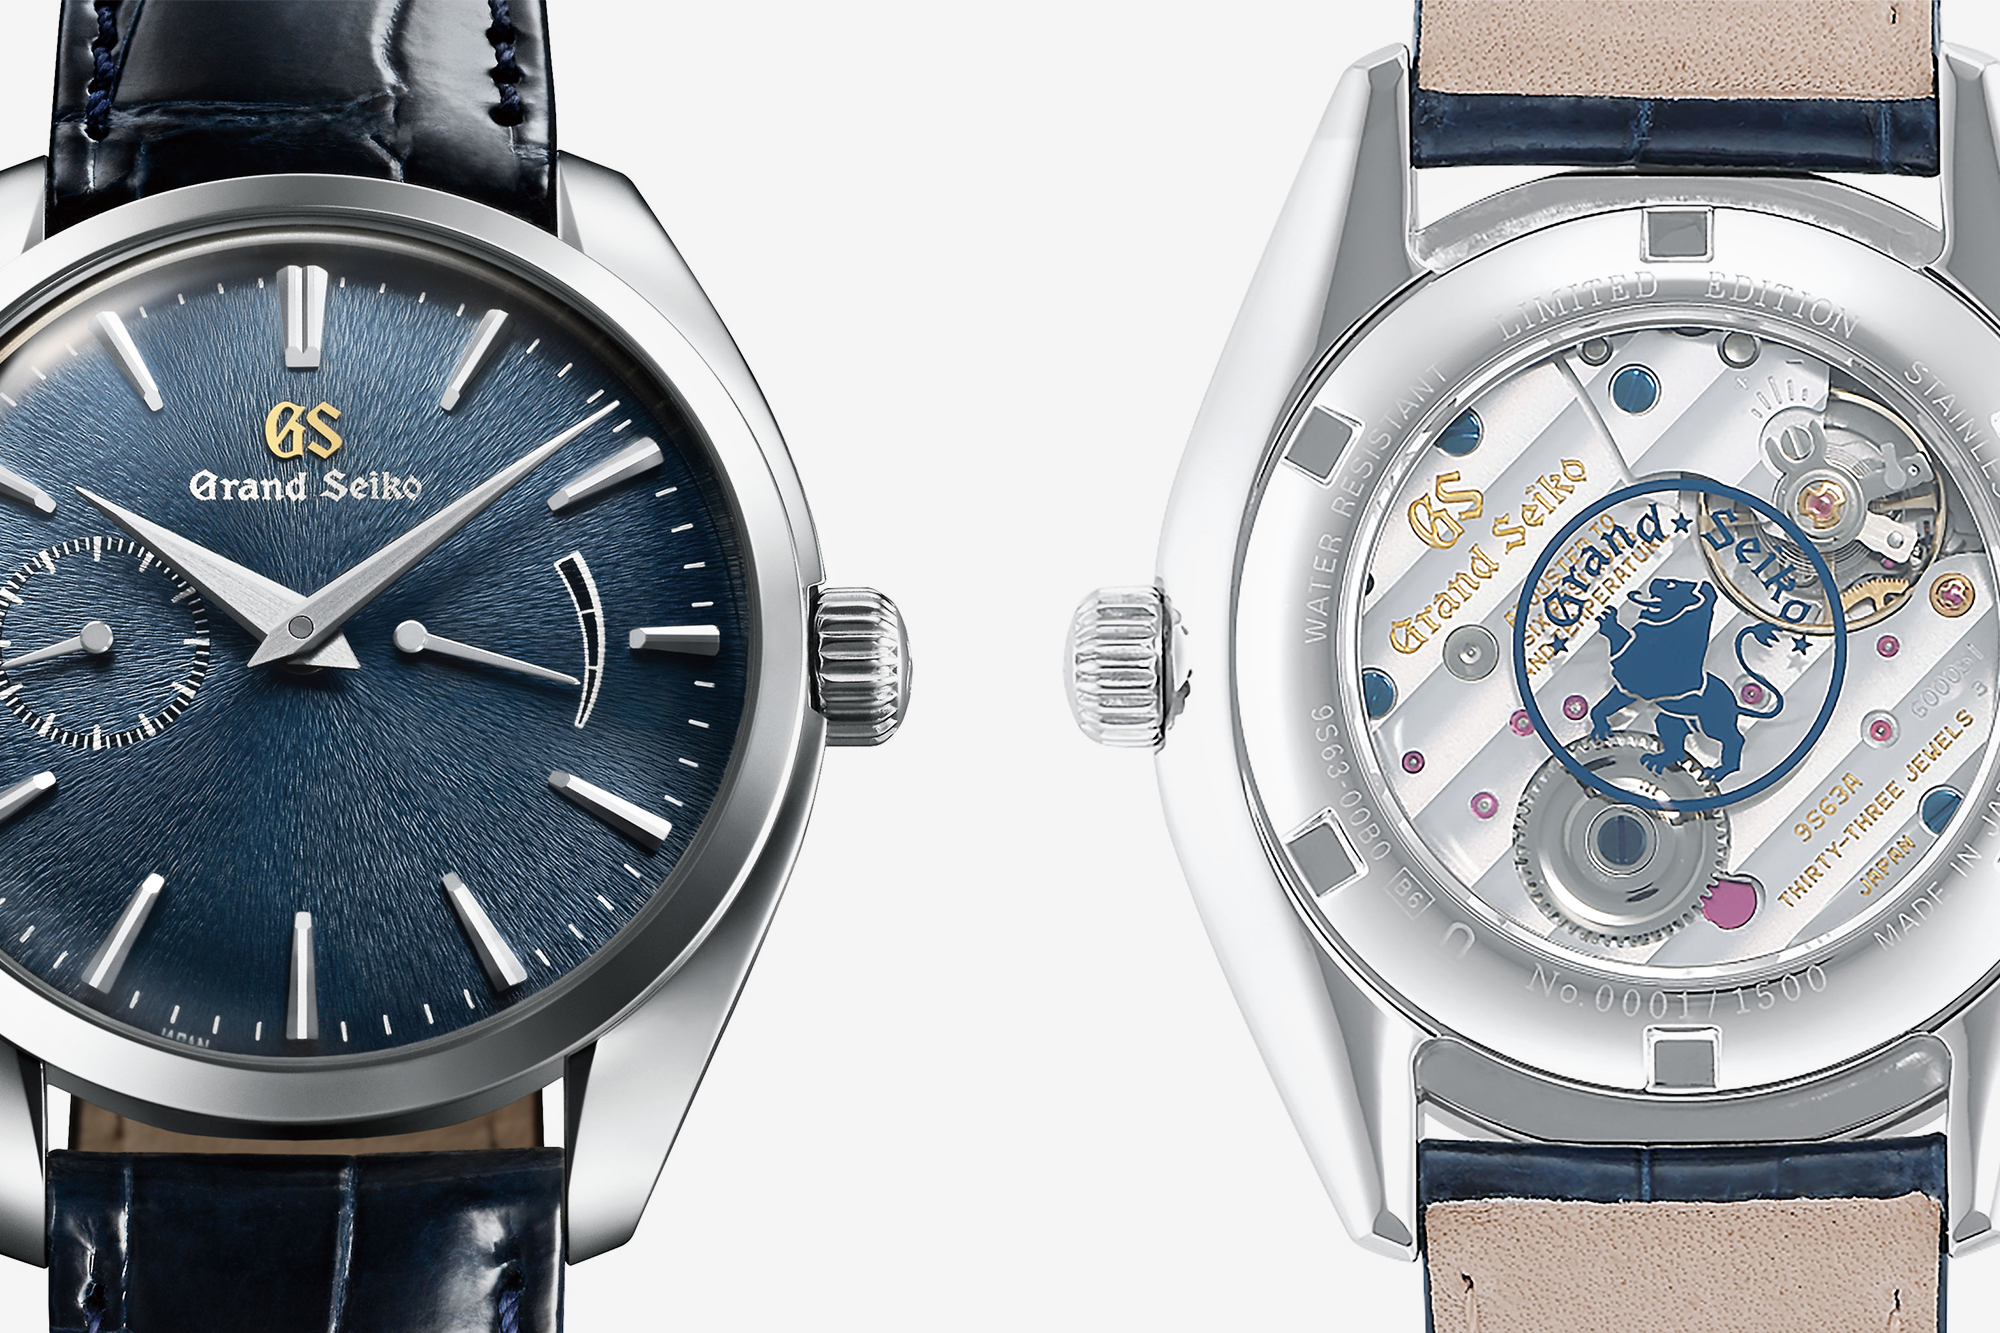 Introducing the Grand Seiko Elegance Collection (Refs. SBGK004, SBGK005, and SBGK006) and Caliber - Worn & Wound